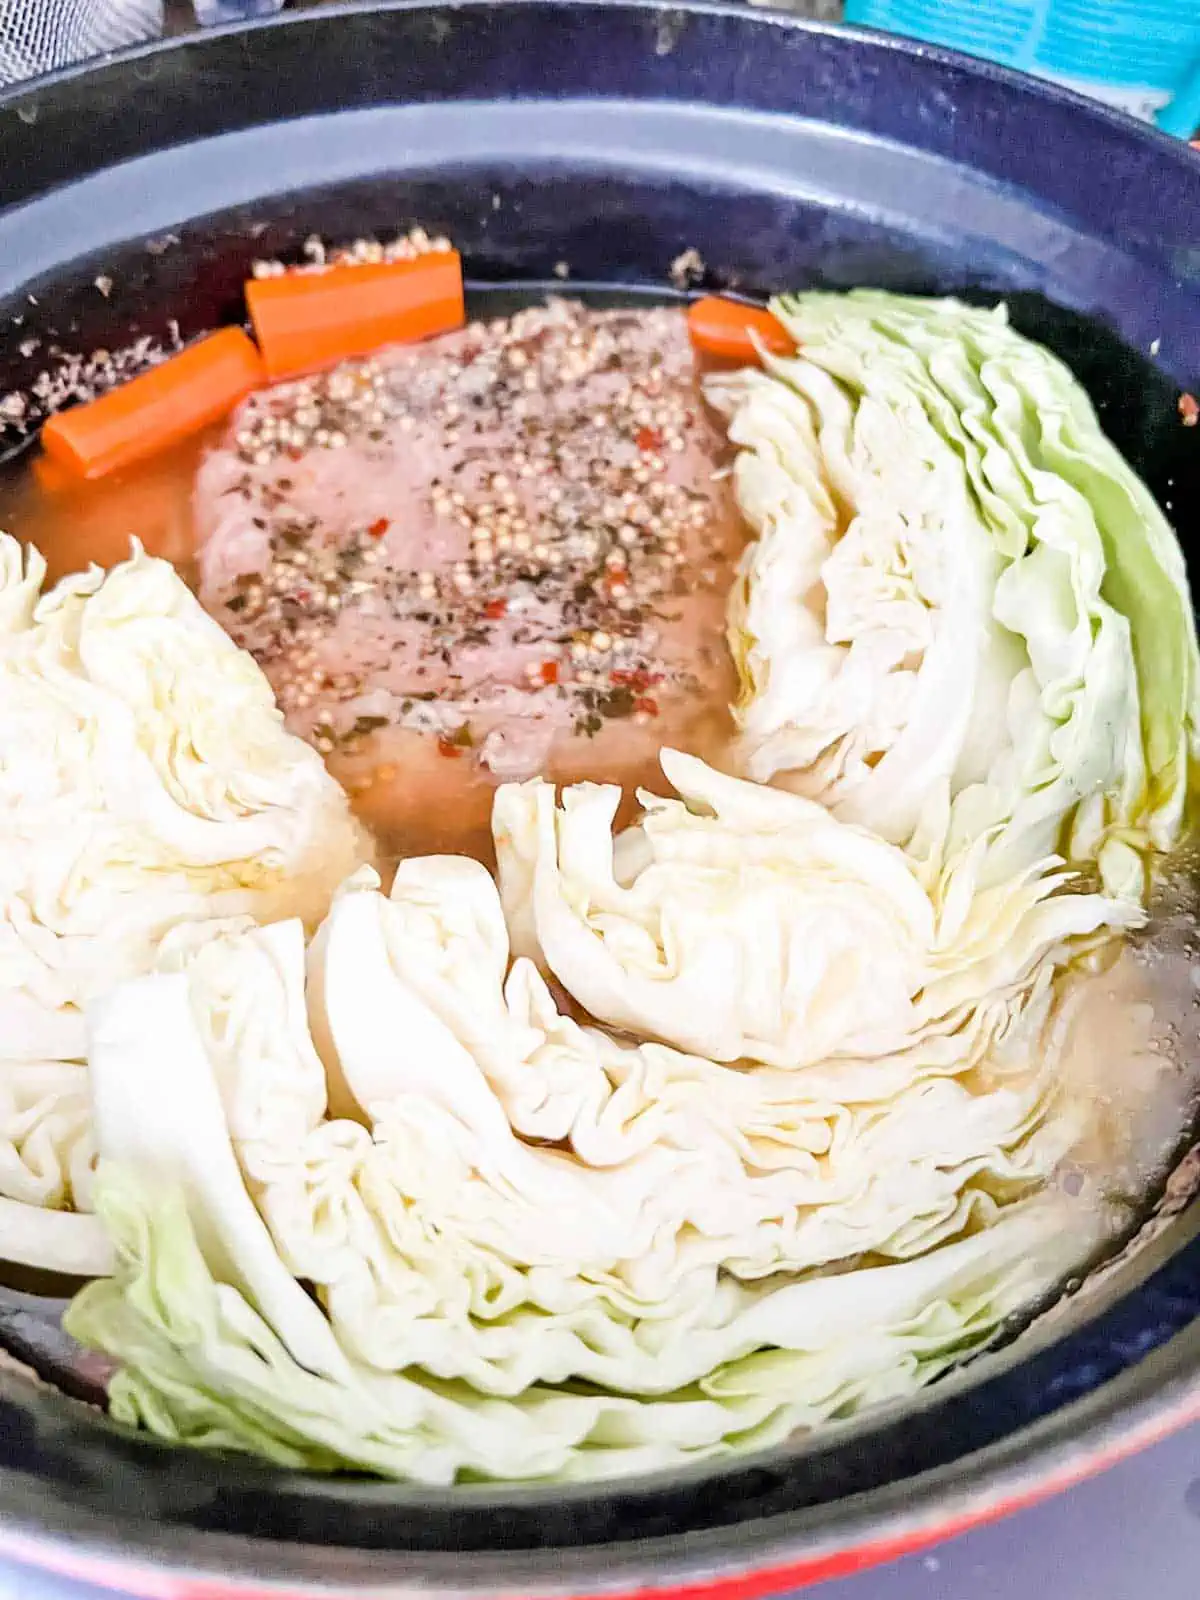 Photo of corned beef and cabbage in and Instant pot Dutch Oven.